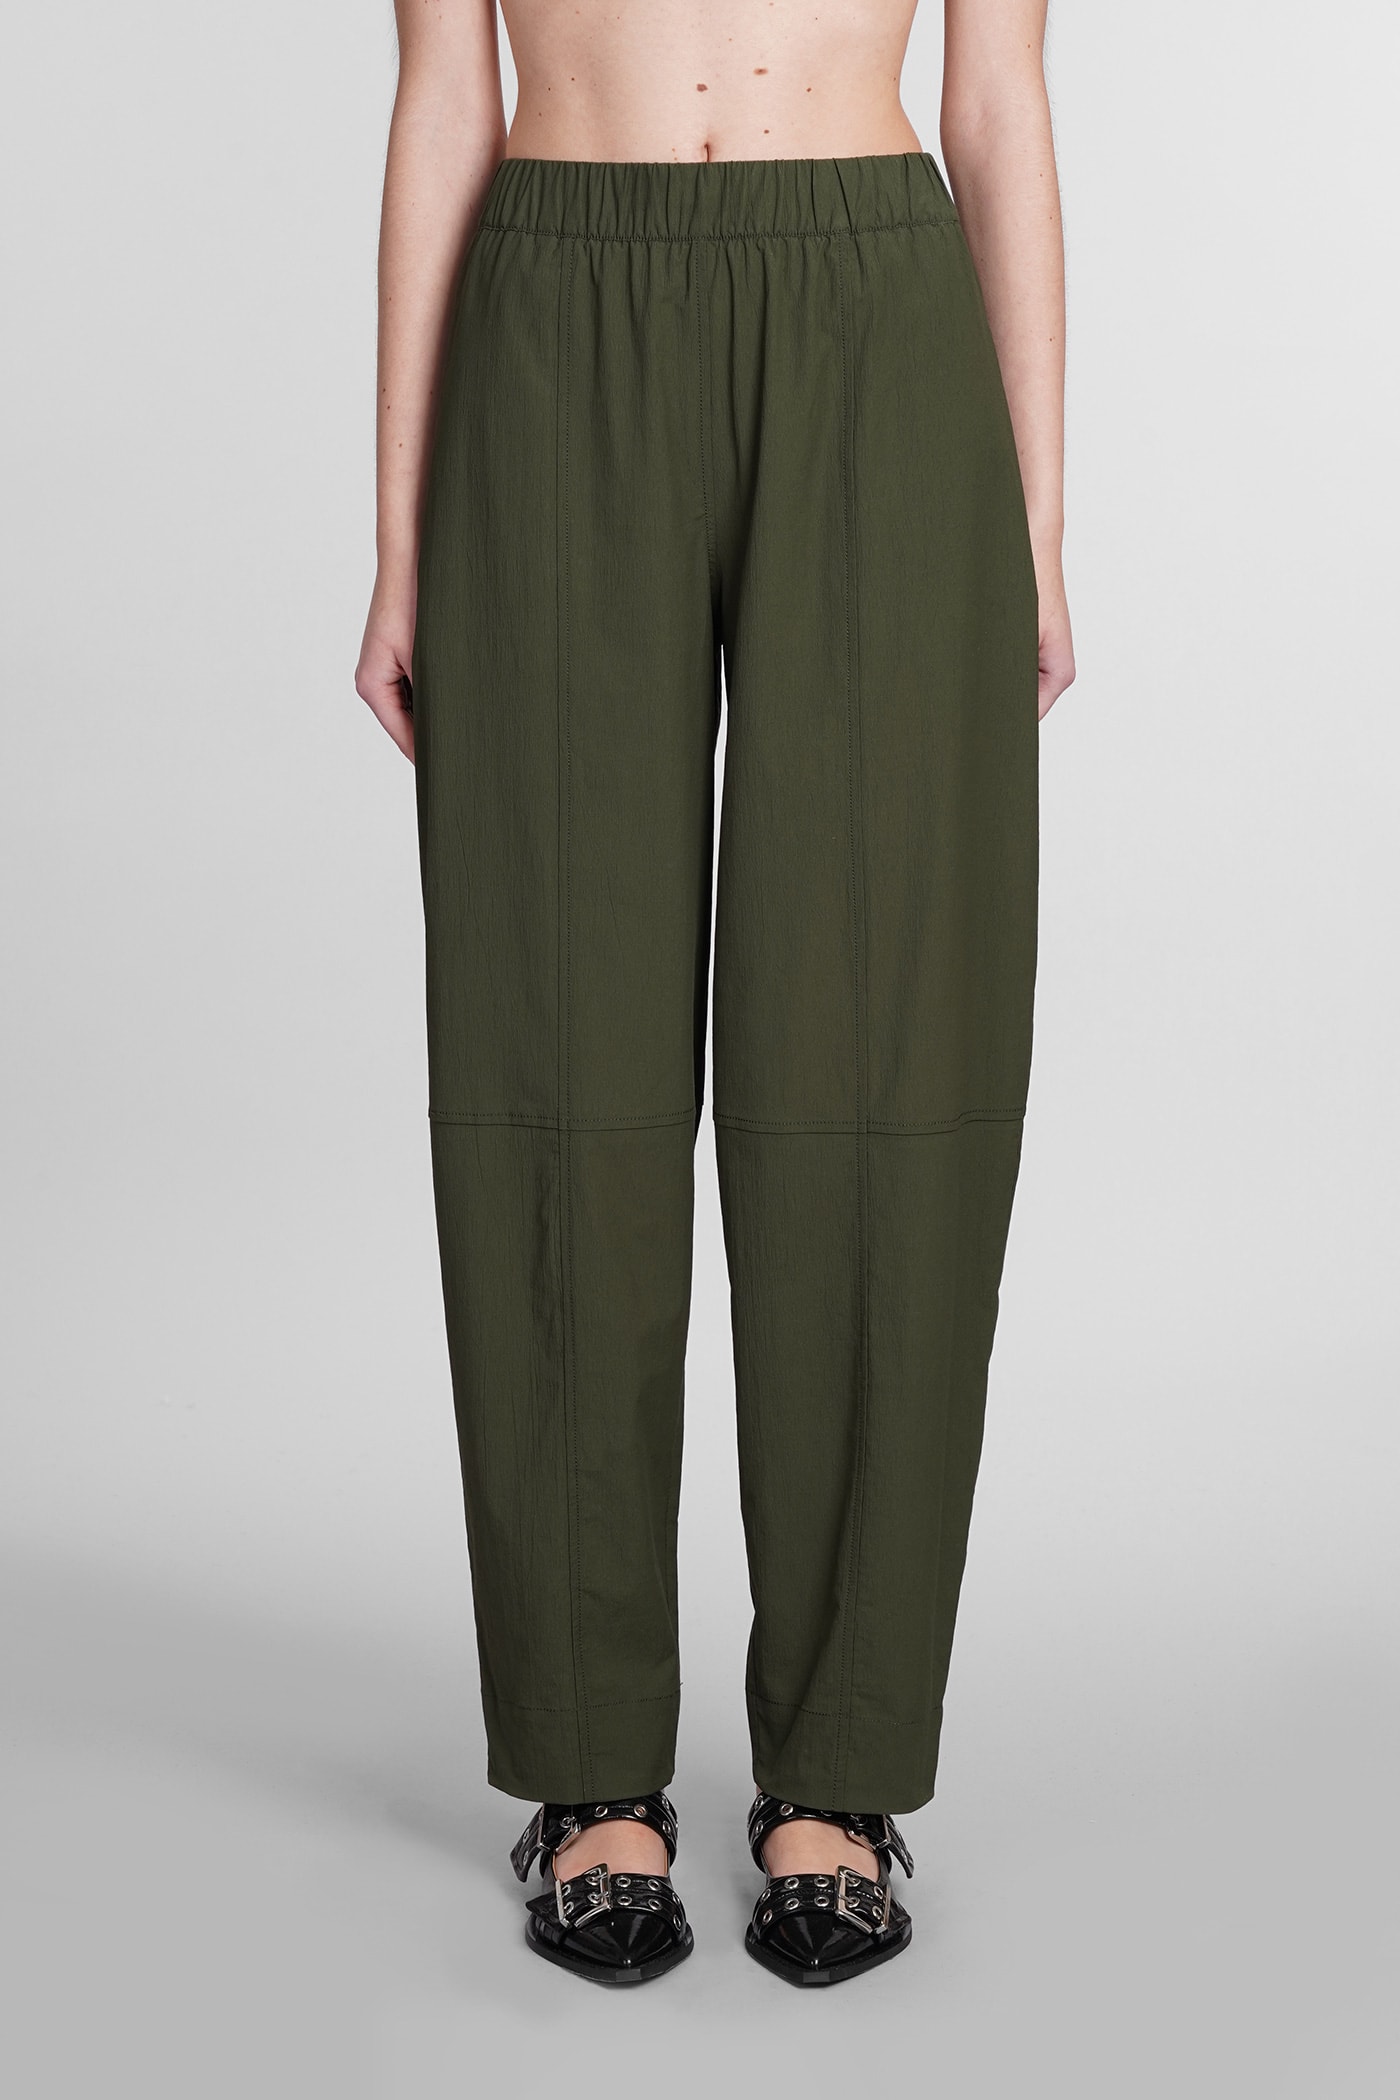 Ganni Pants In Green Cotton